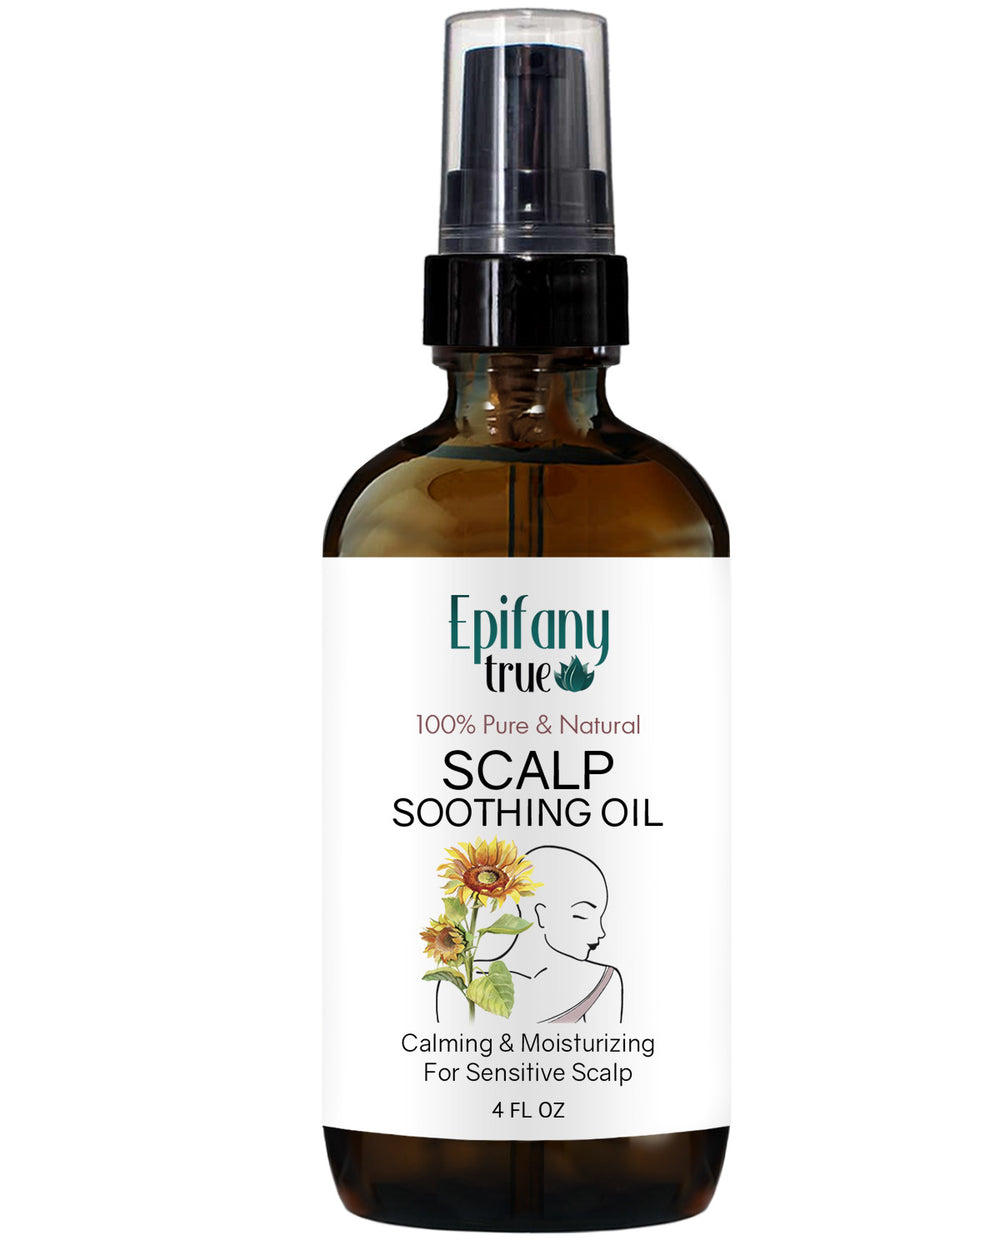 Epifany True 100% Pure & Natural Scalp Soothing Oil 4oz for tender dry itchy chemo scalp